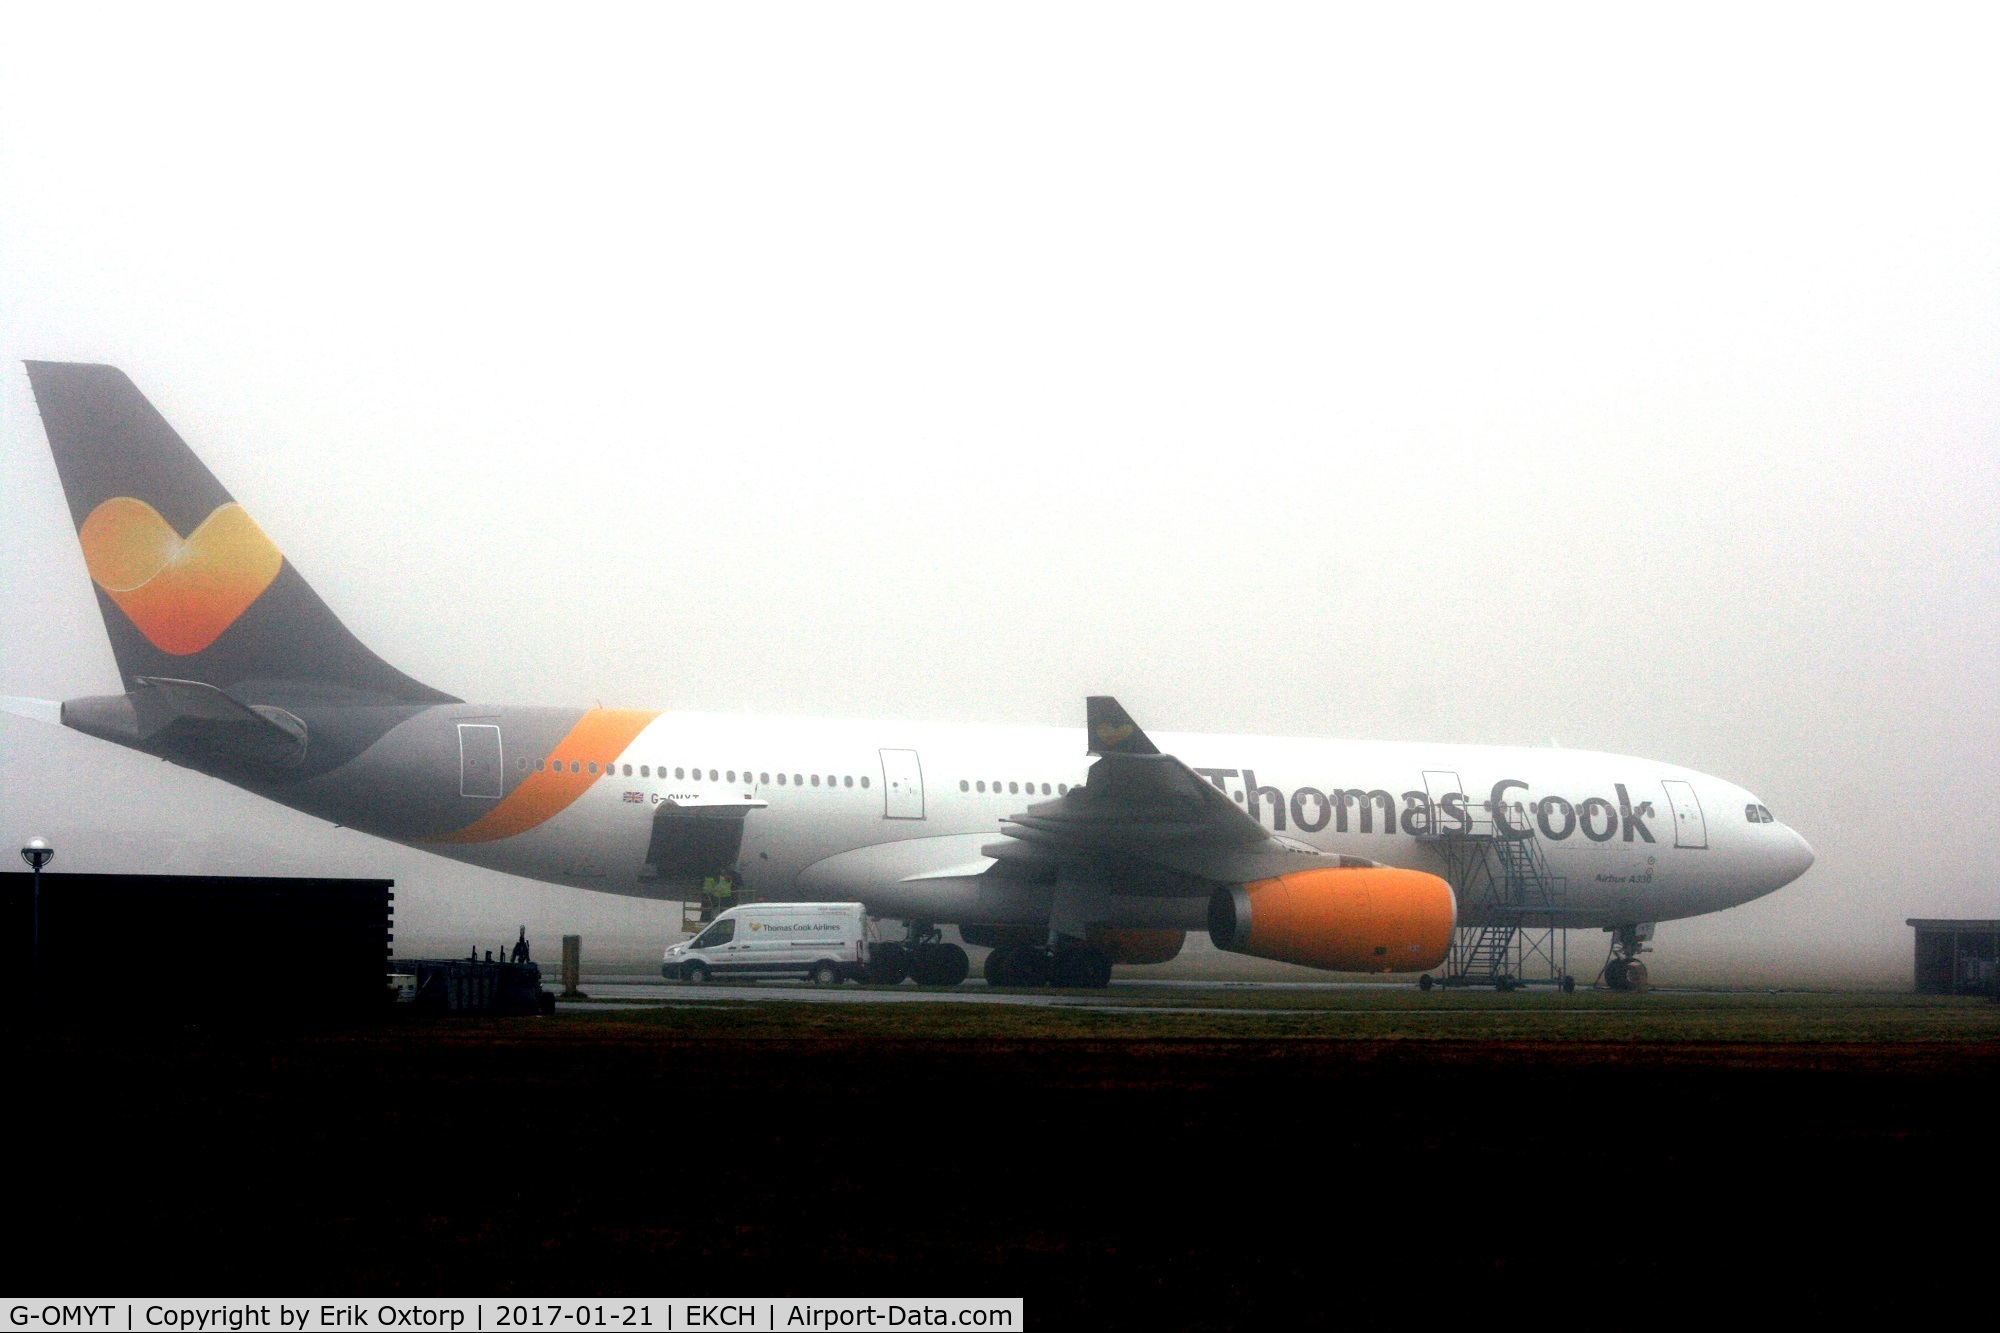 G-OMYT, 1999 Airbus A330-243 C/N 301, G-OMYT in CPH. Operating for Thomas Cook Dcandinavia